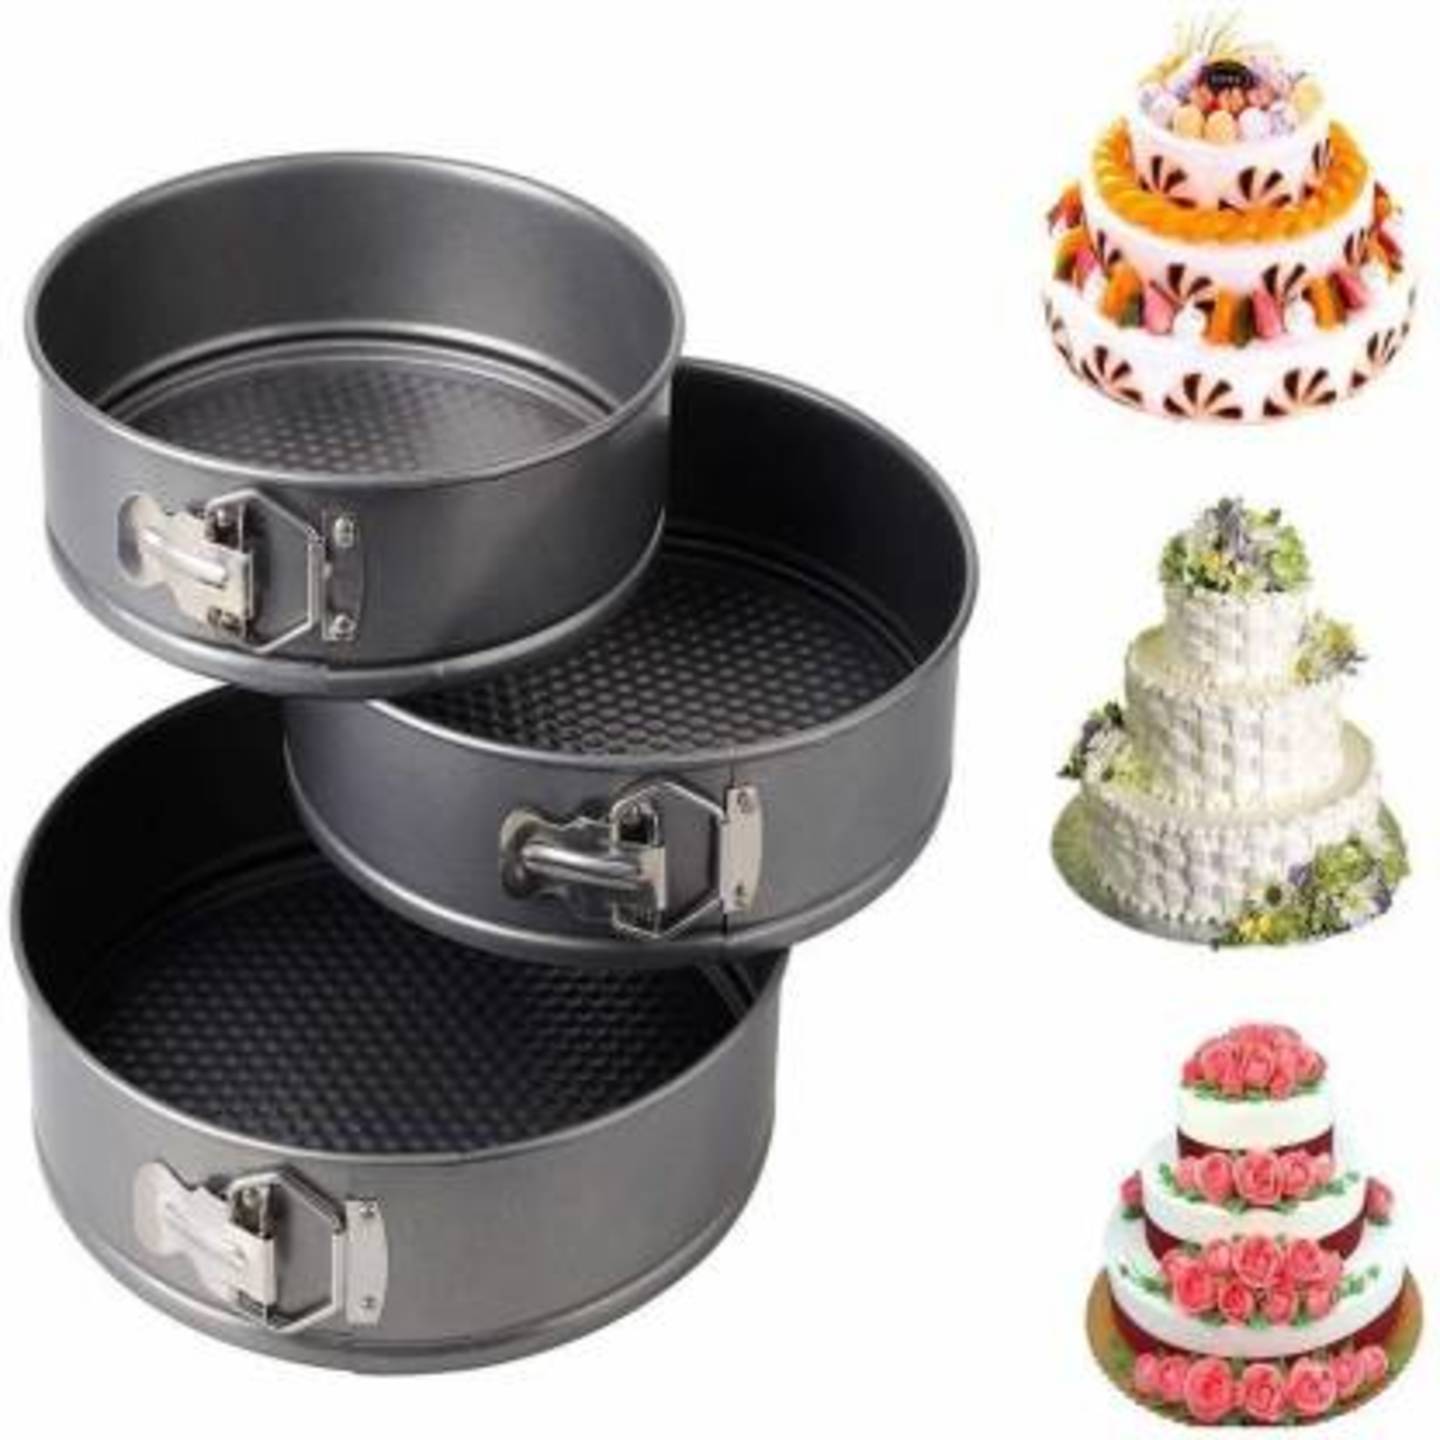 Set of 3 Round Cake Mould for Baking Non Stick Cake TinsPanTray for Microwave Oven, and Cooker Cake Mould  Pack of 3